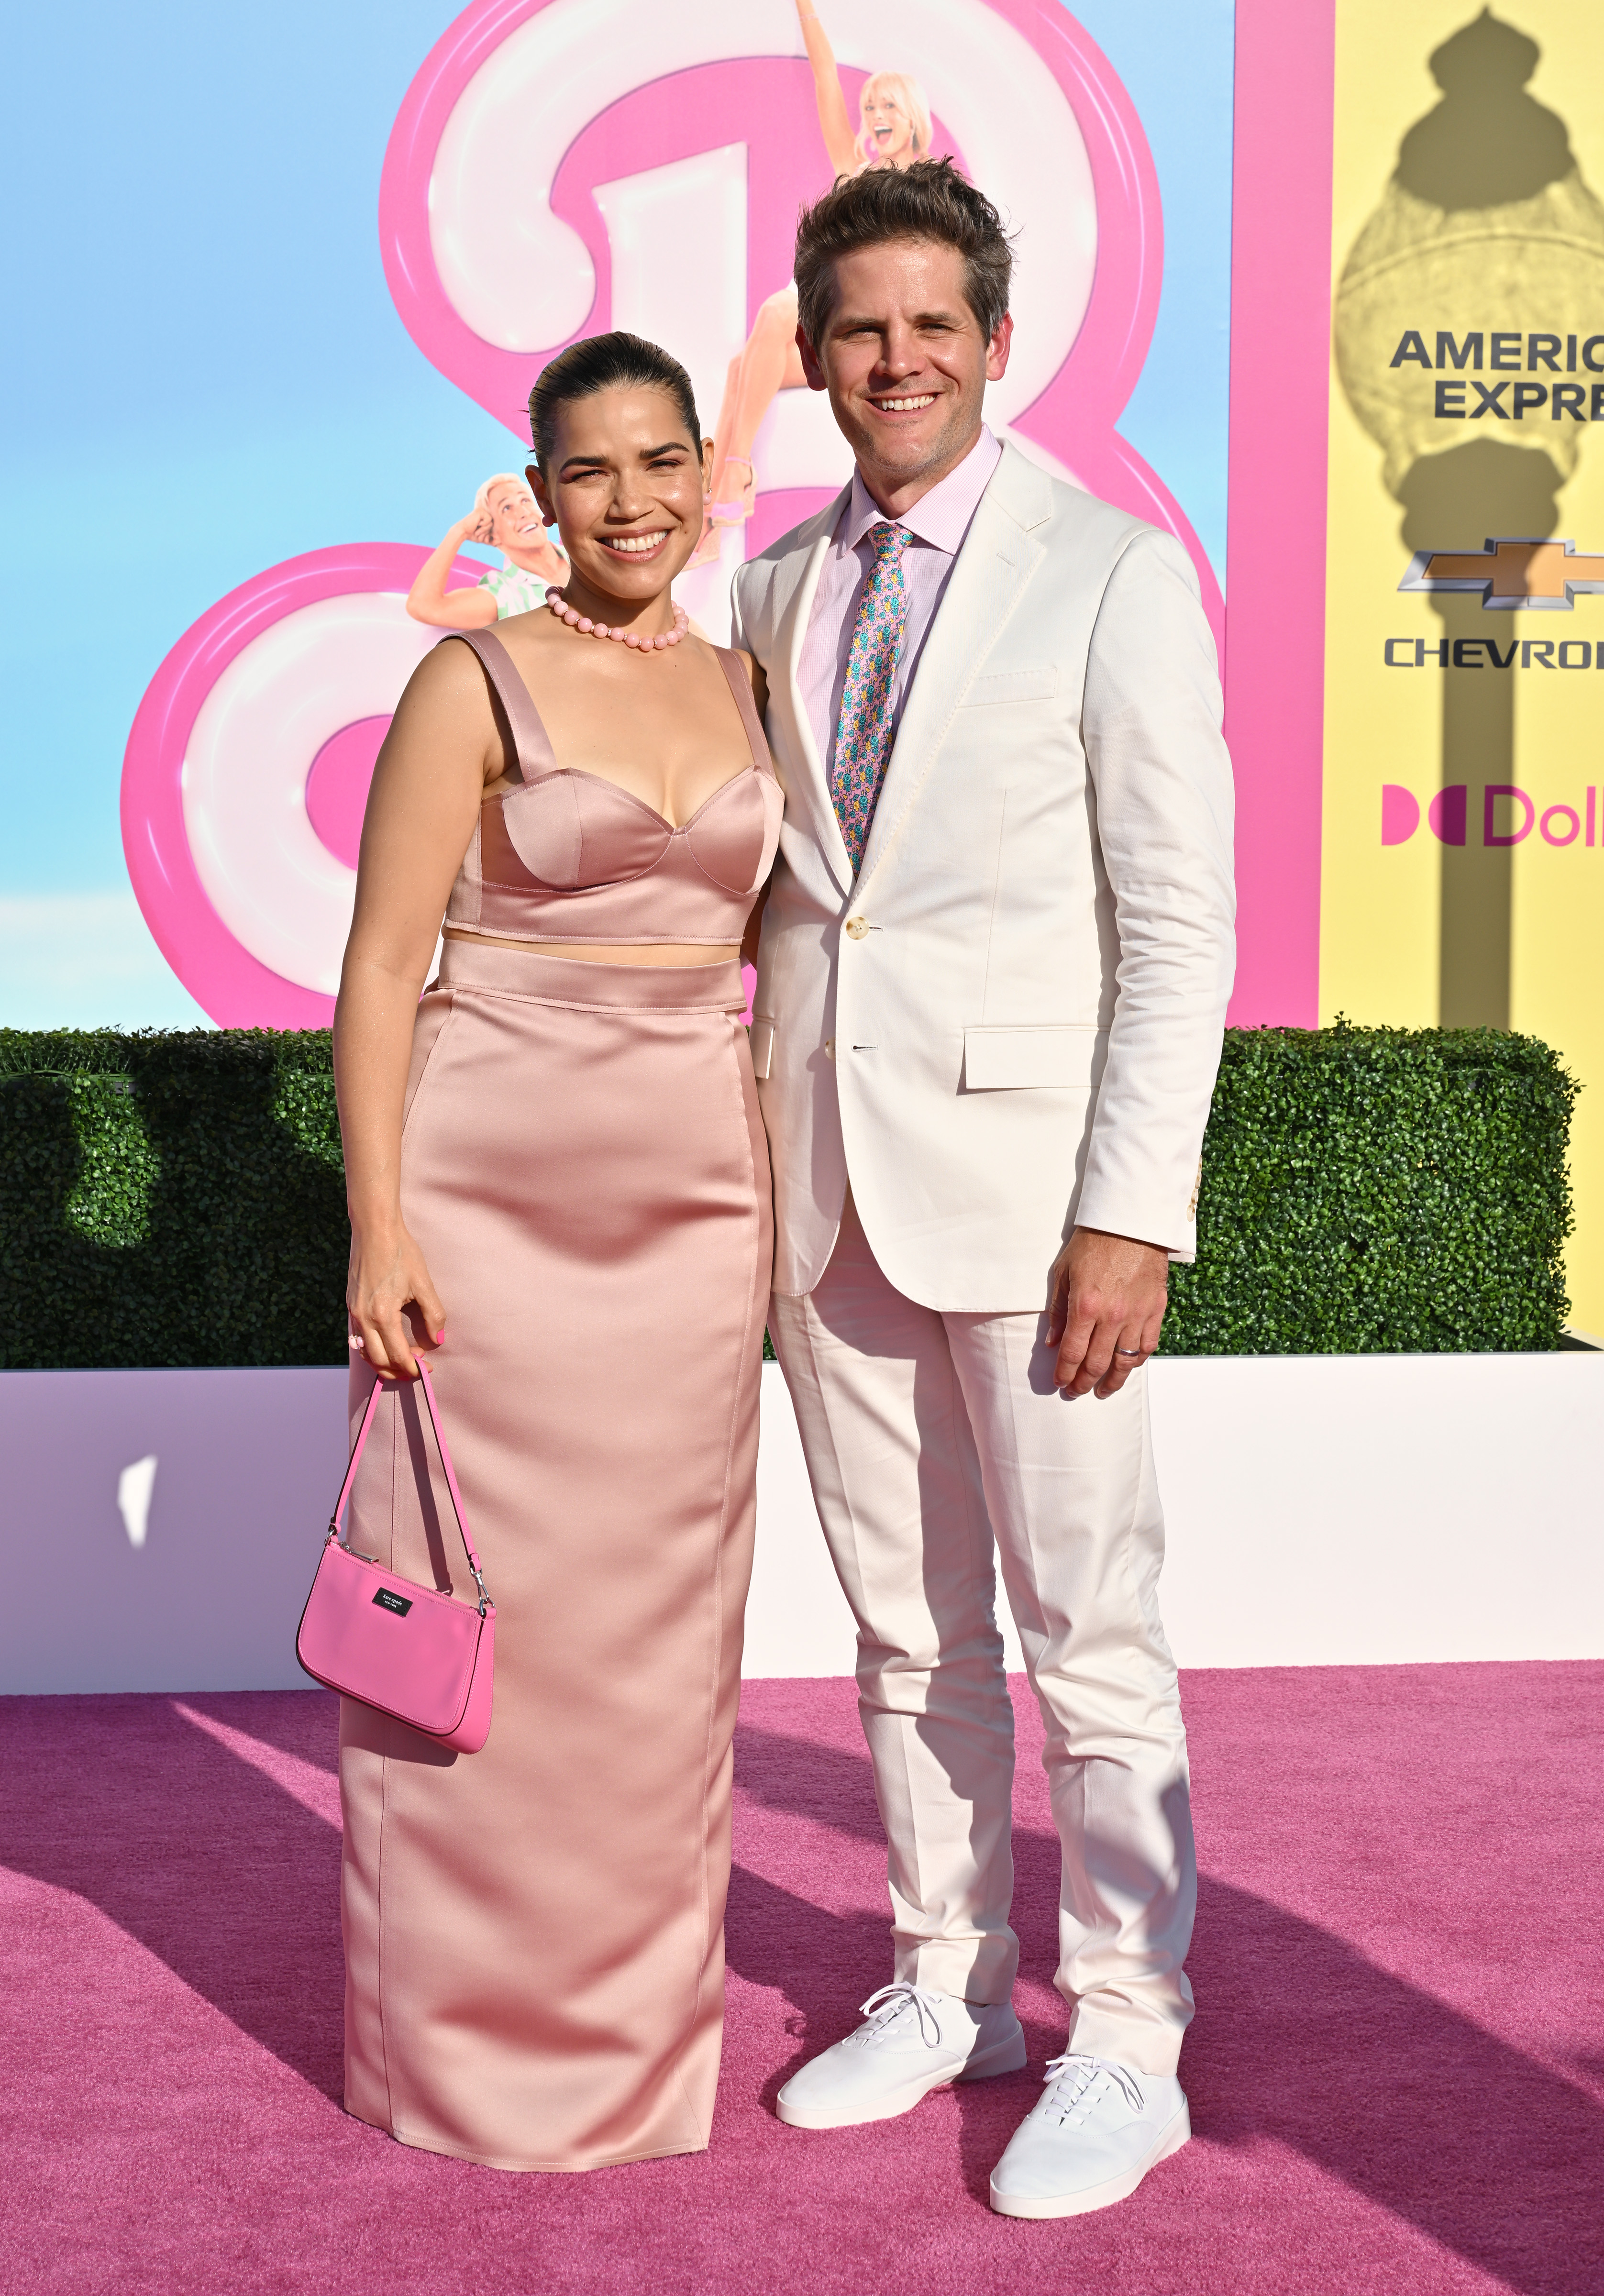 The couple on the pink carpet for an event for Barbie